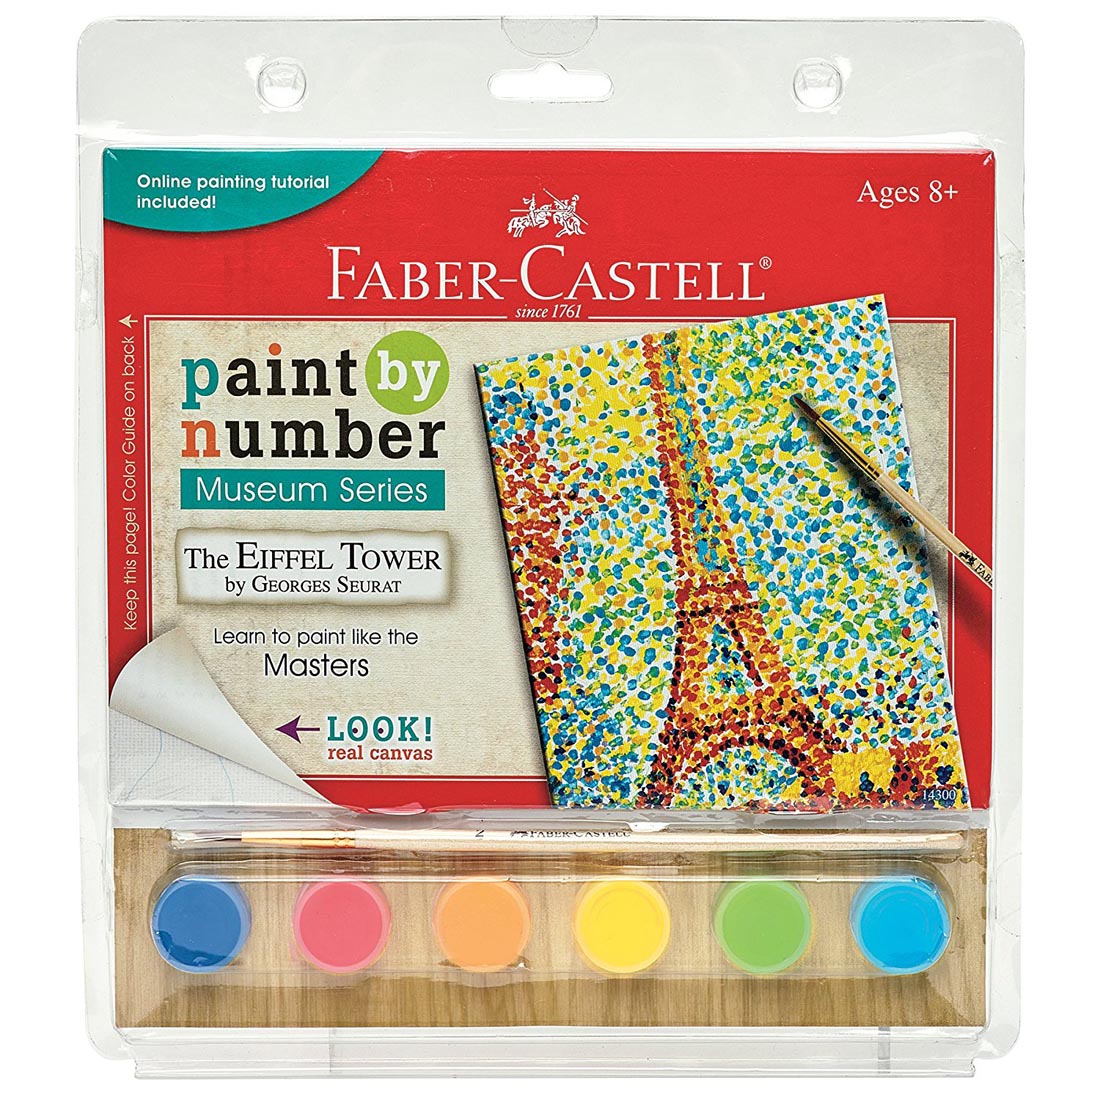 Faber-Castell Paint By Number Museum Series: The Eiffel Tower